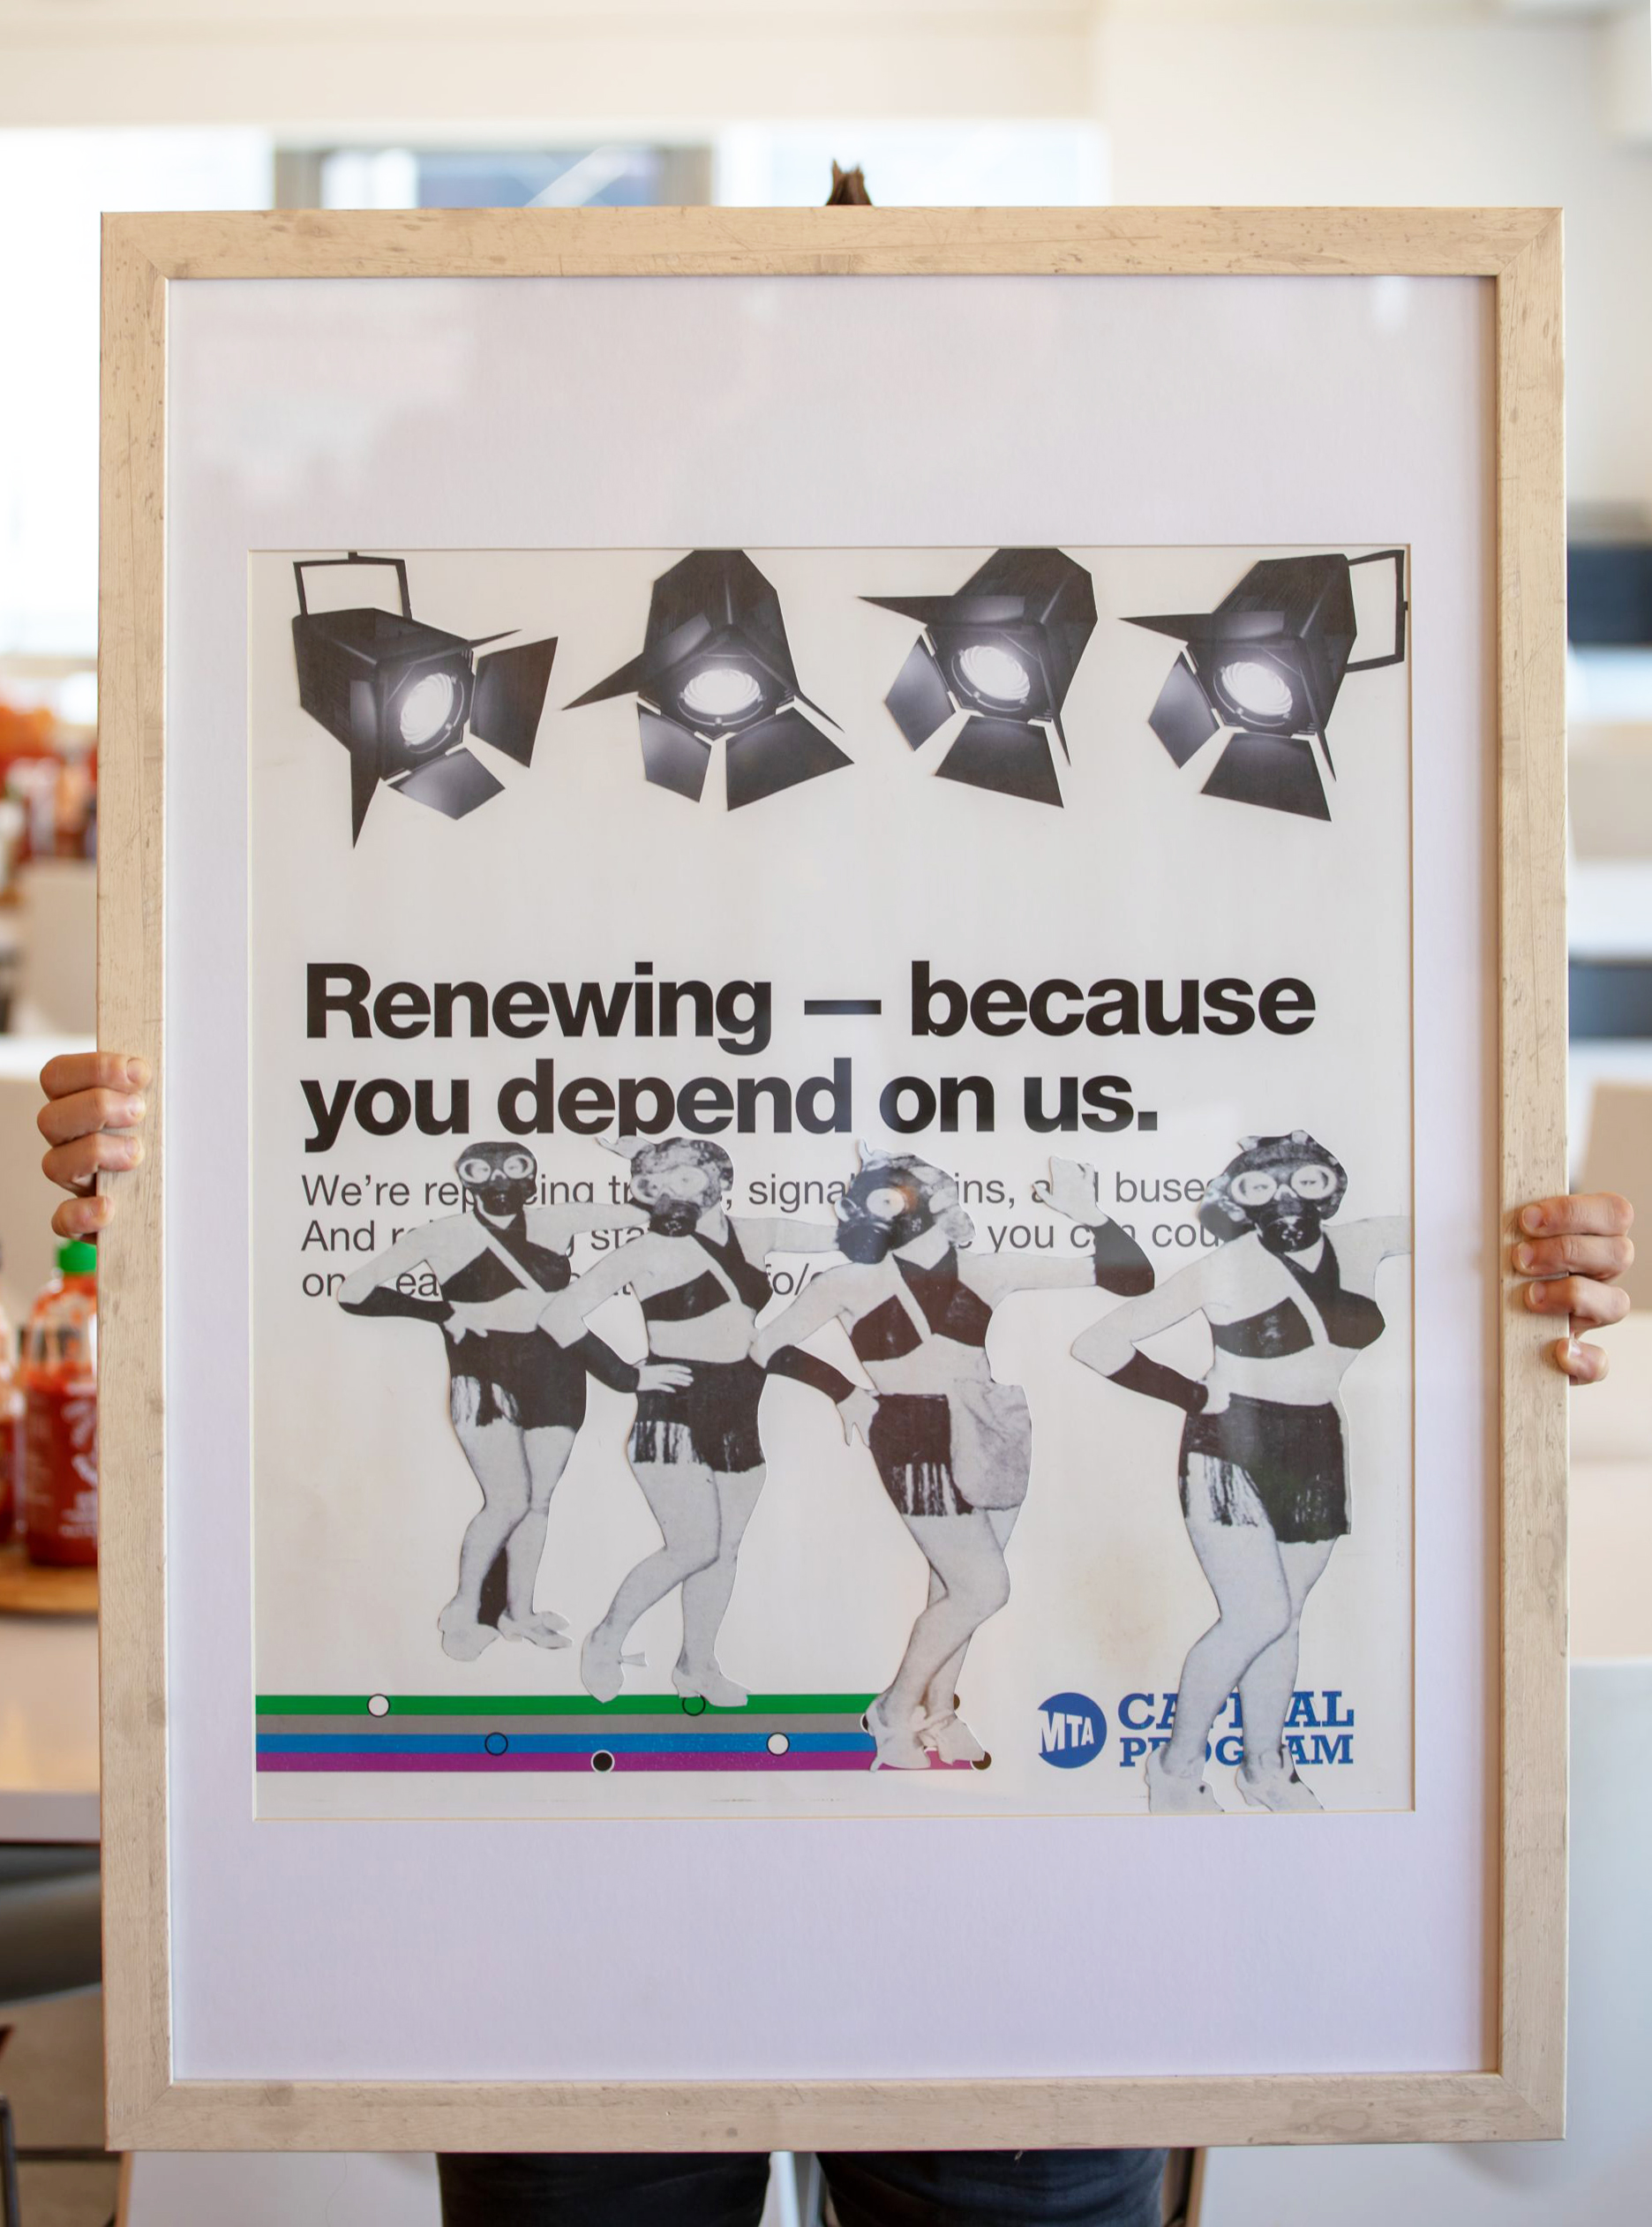 Photograph of a framed work of art featuring black and white images of dancers on top of an MTA announcement poster.